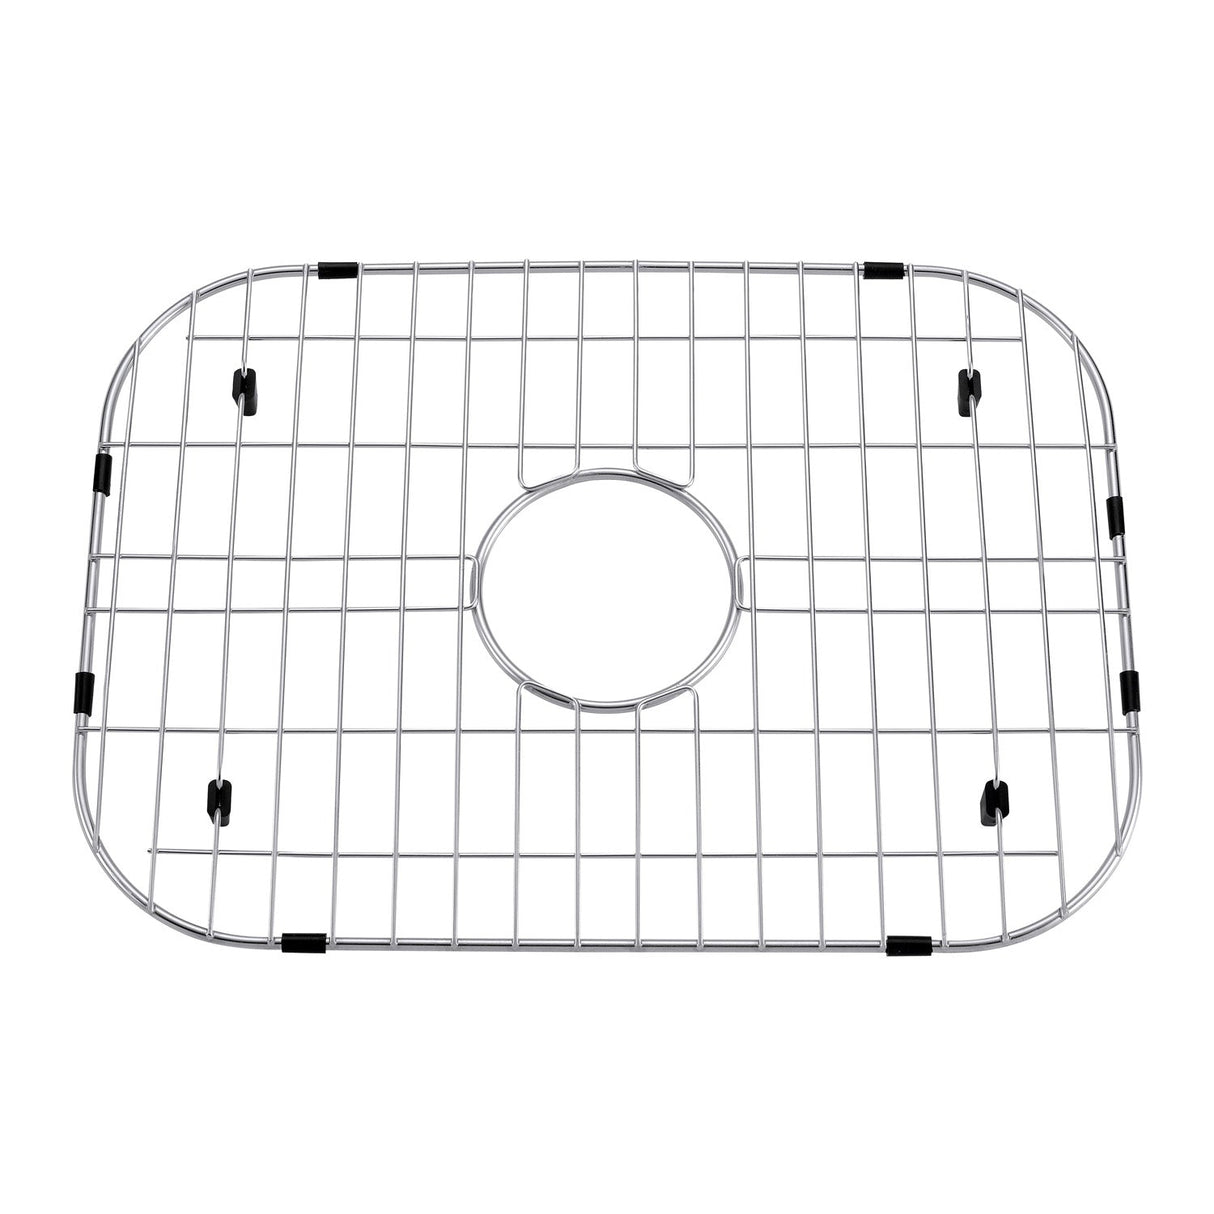 DAX Grid for Kitchen Sink, Stainless Steel Body, Chrome Finish, Compatible with DAX-2317, 19 x 14 Inches (GRID-2317) GRID-2317